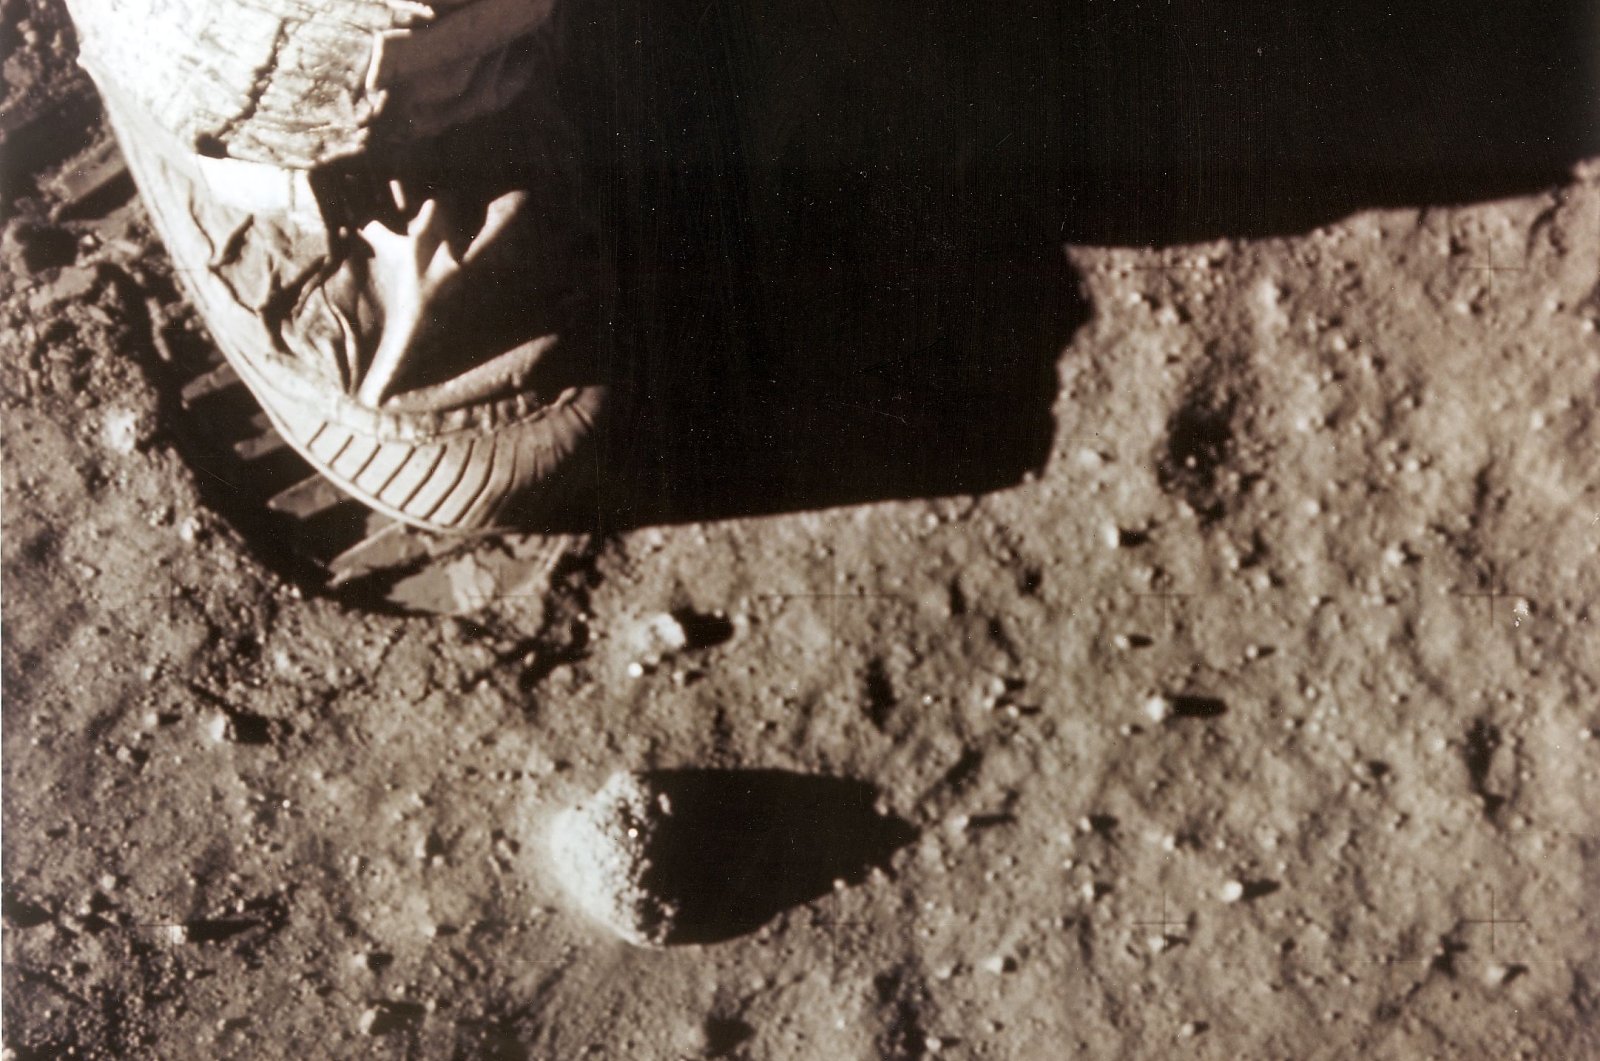 Apollo 11 commander Neil Armstrong&#039;s right foot leaves a footprint in the lunar soil as he and Edwin "Buzz" Aldrin become the first men to set foot on the surface of the moon, July 20, 1969. (AFP Photo)